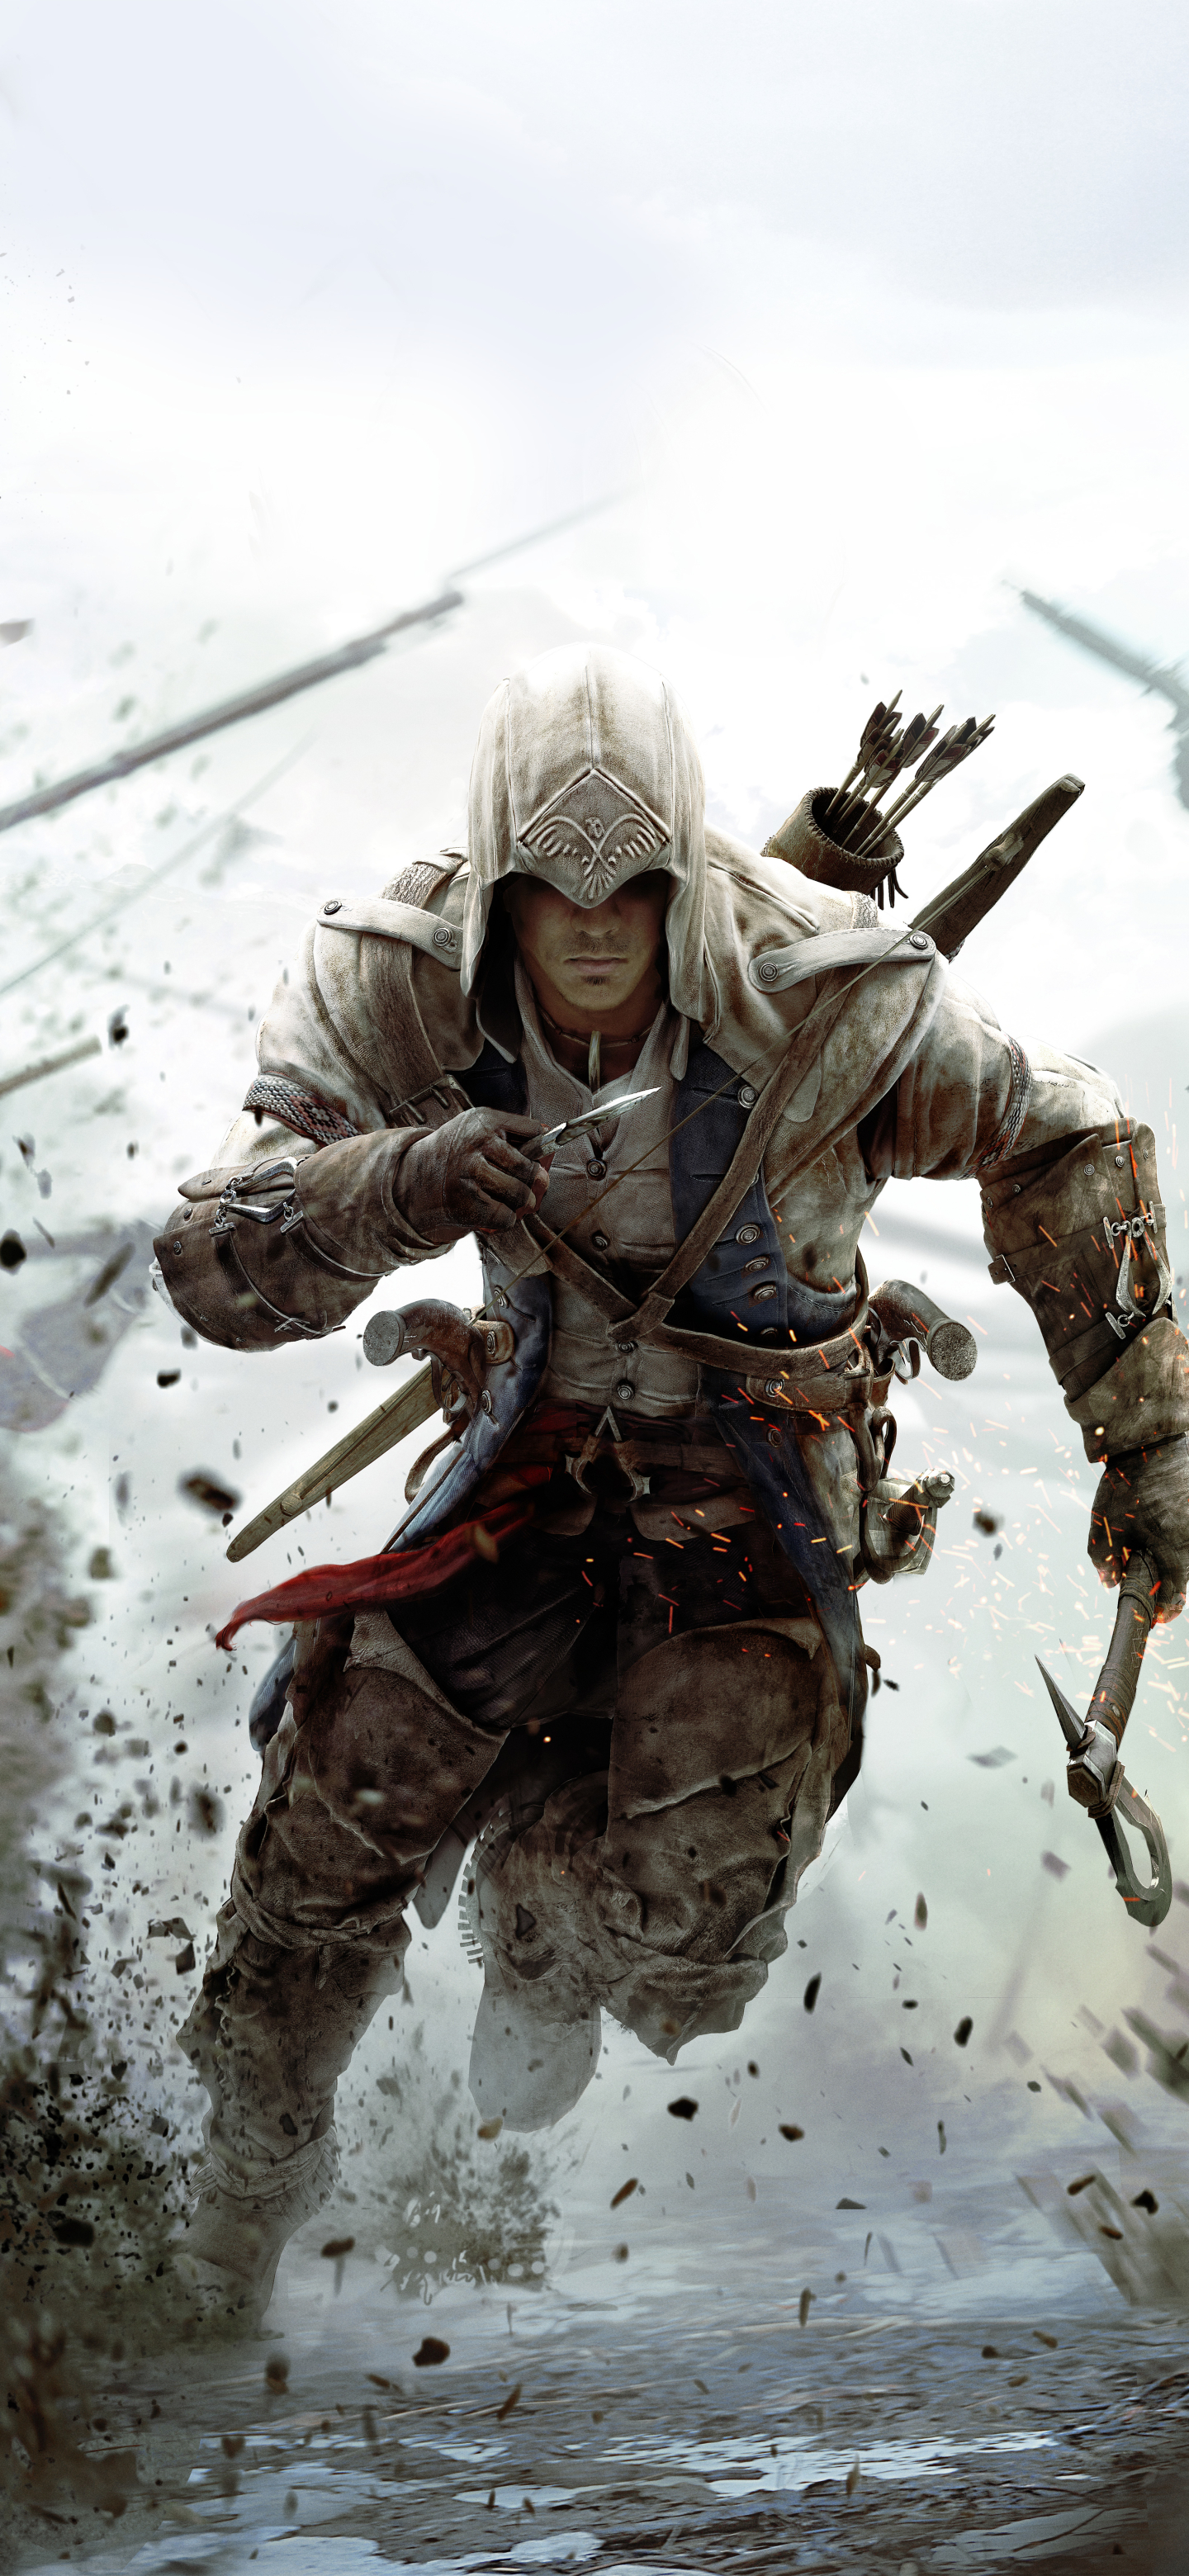 video game, assassin's creed iii, connor (assassin's creed), assassin's creed